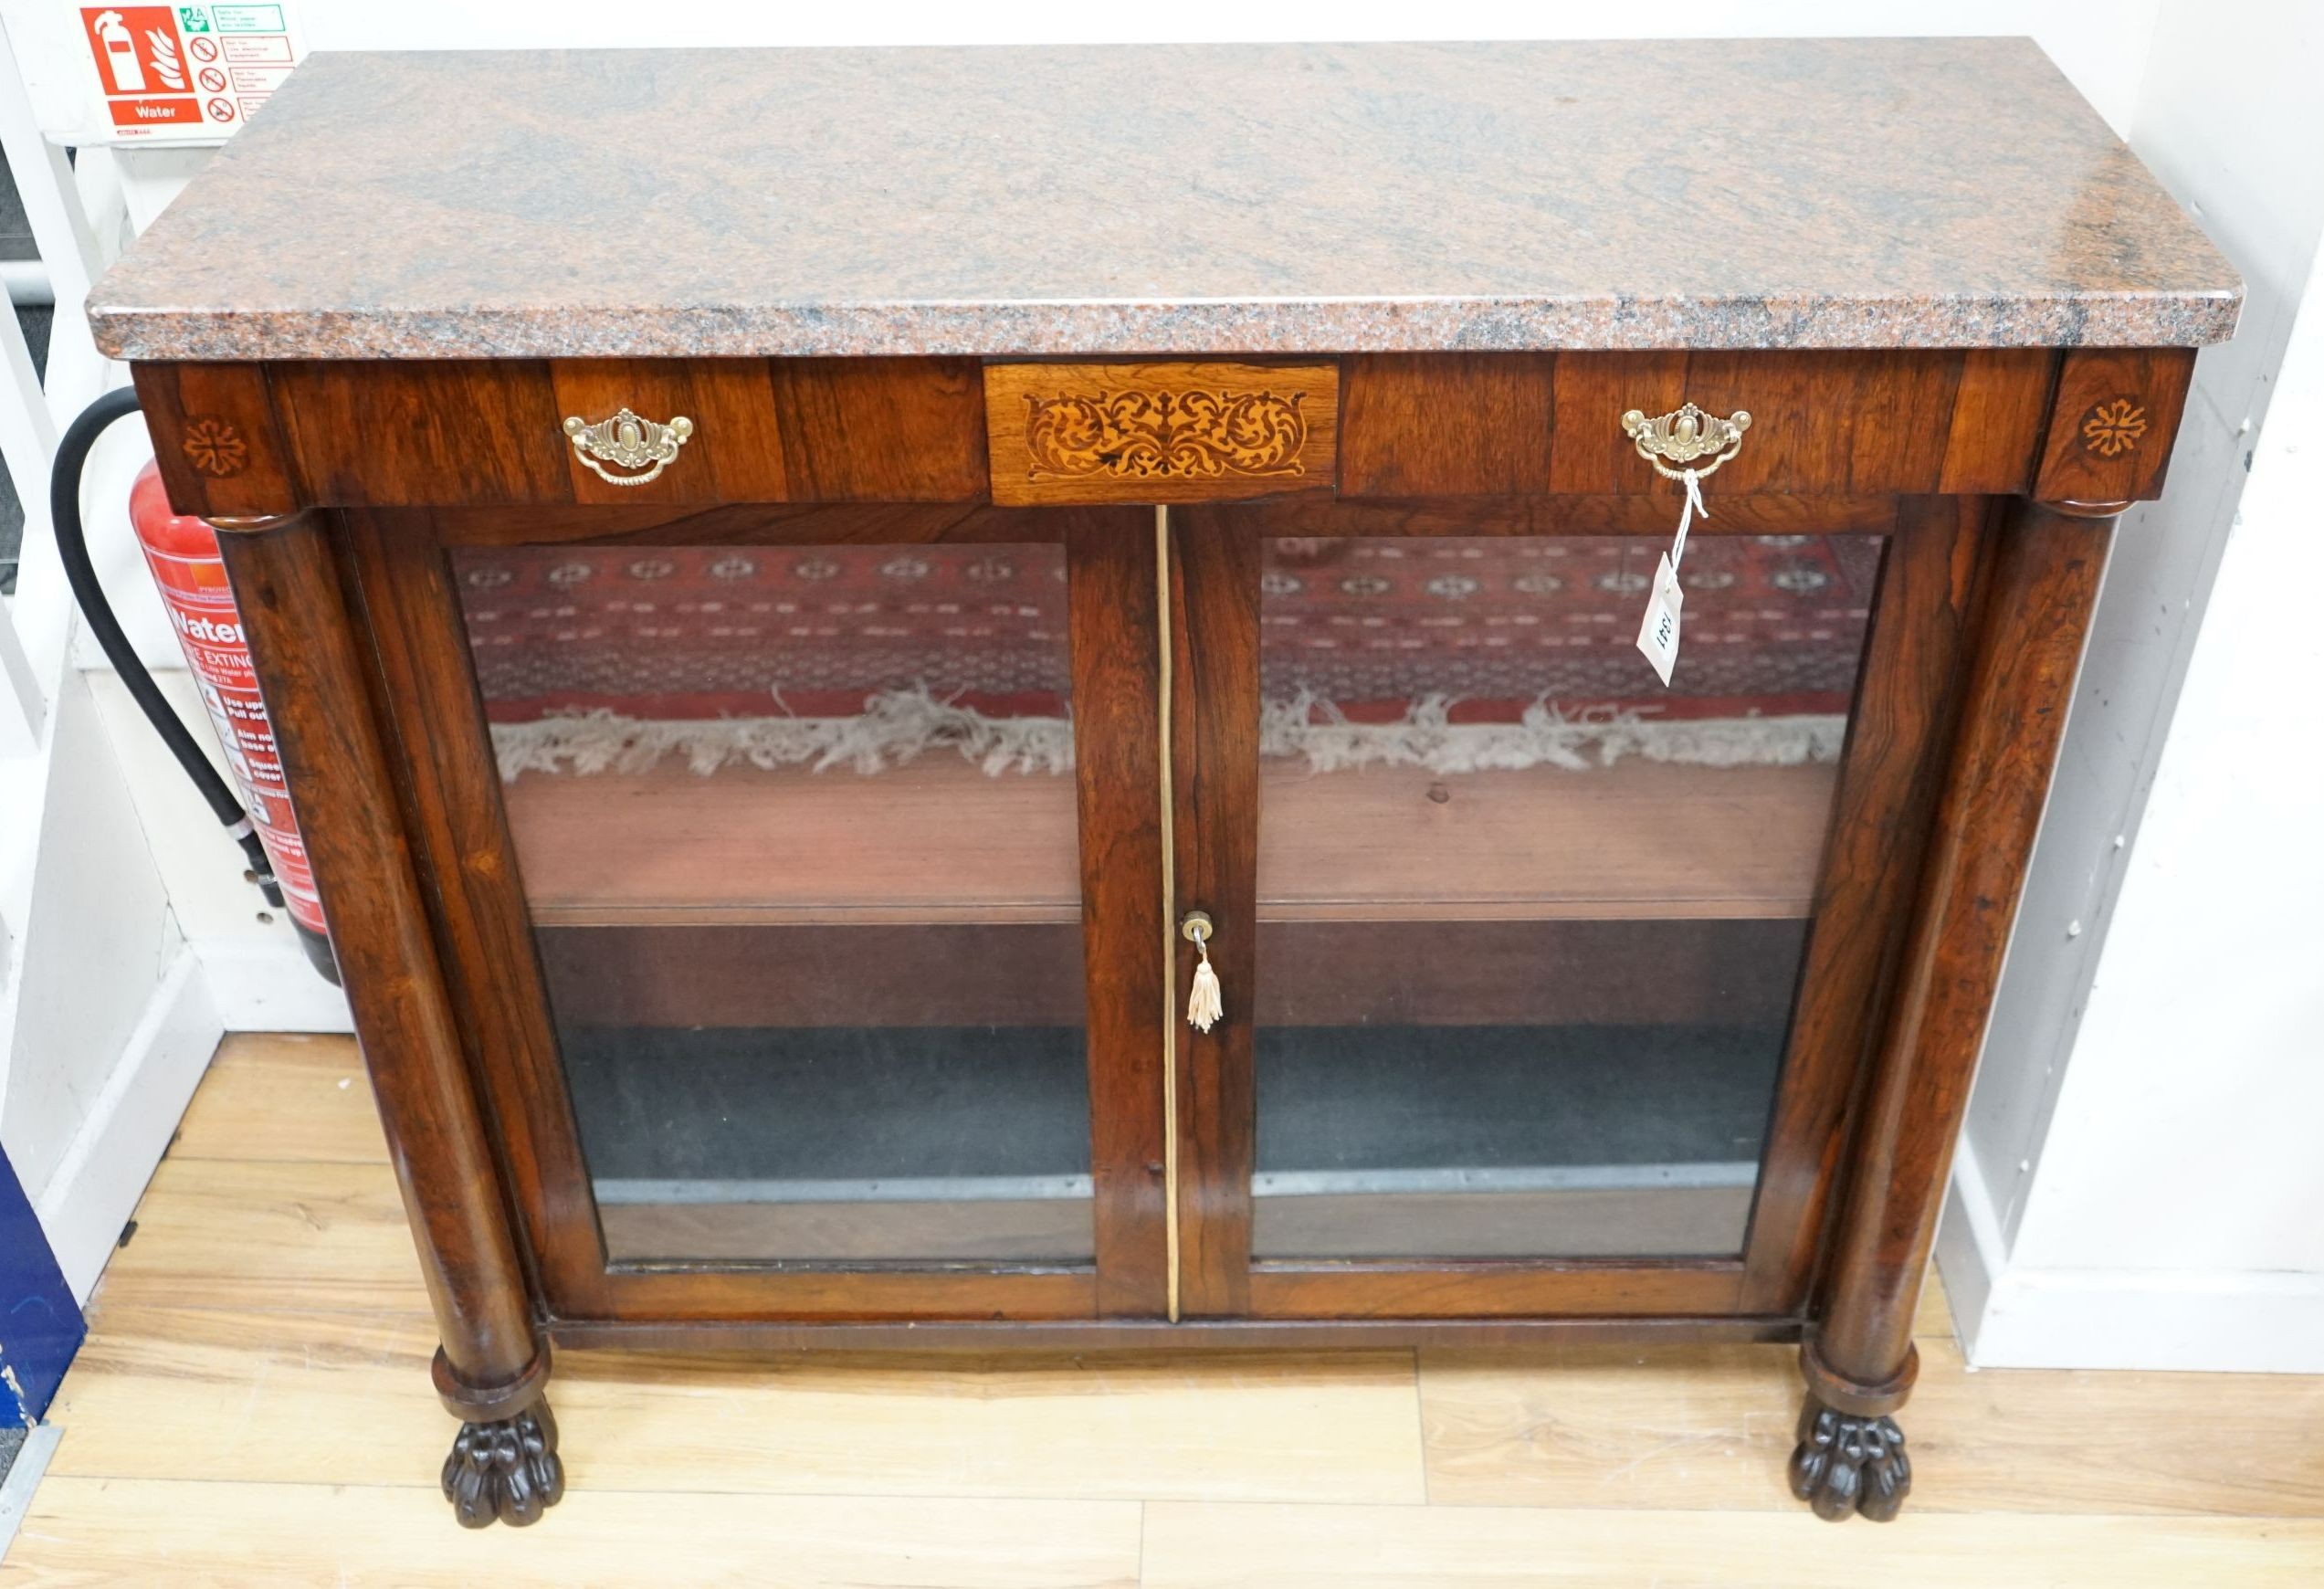 A Regency and later inlaid rosewood marble top dwarf cabinet, width 107cm, depth 37cm, height 94cm